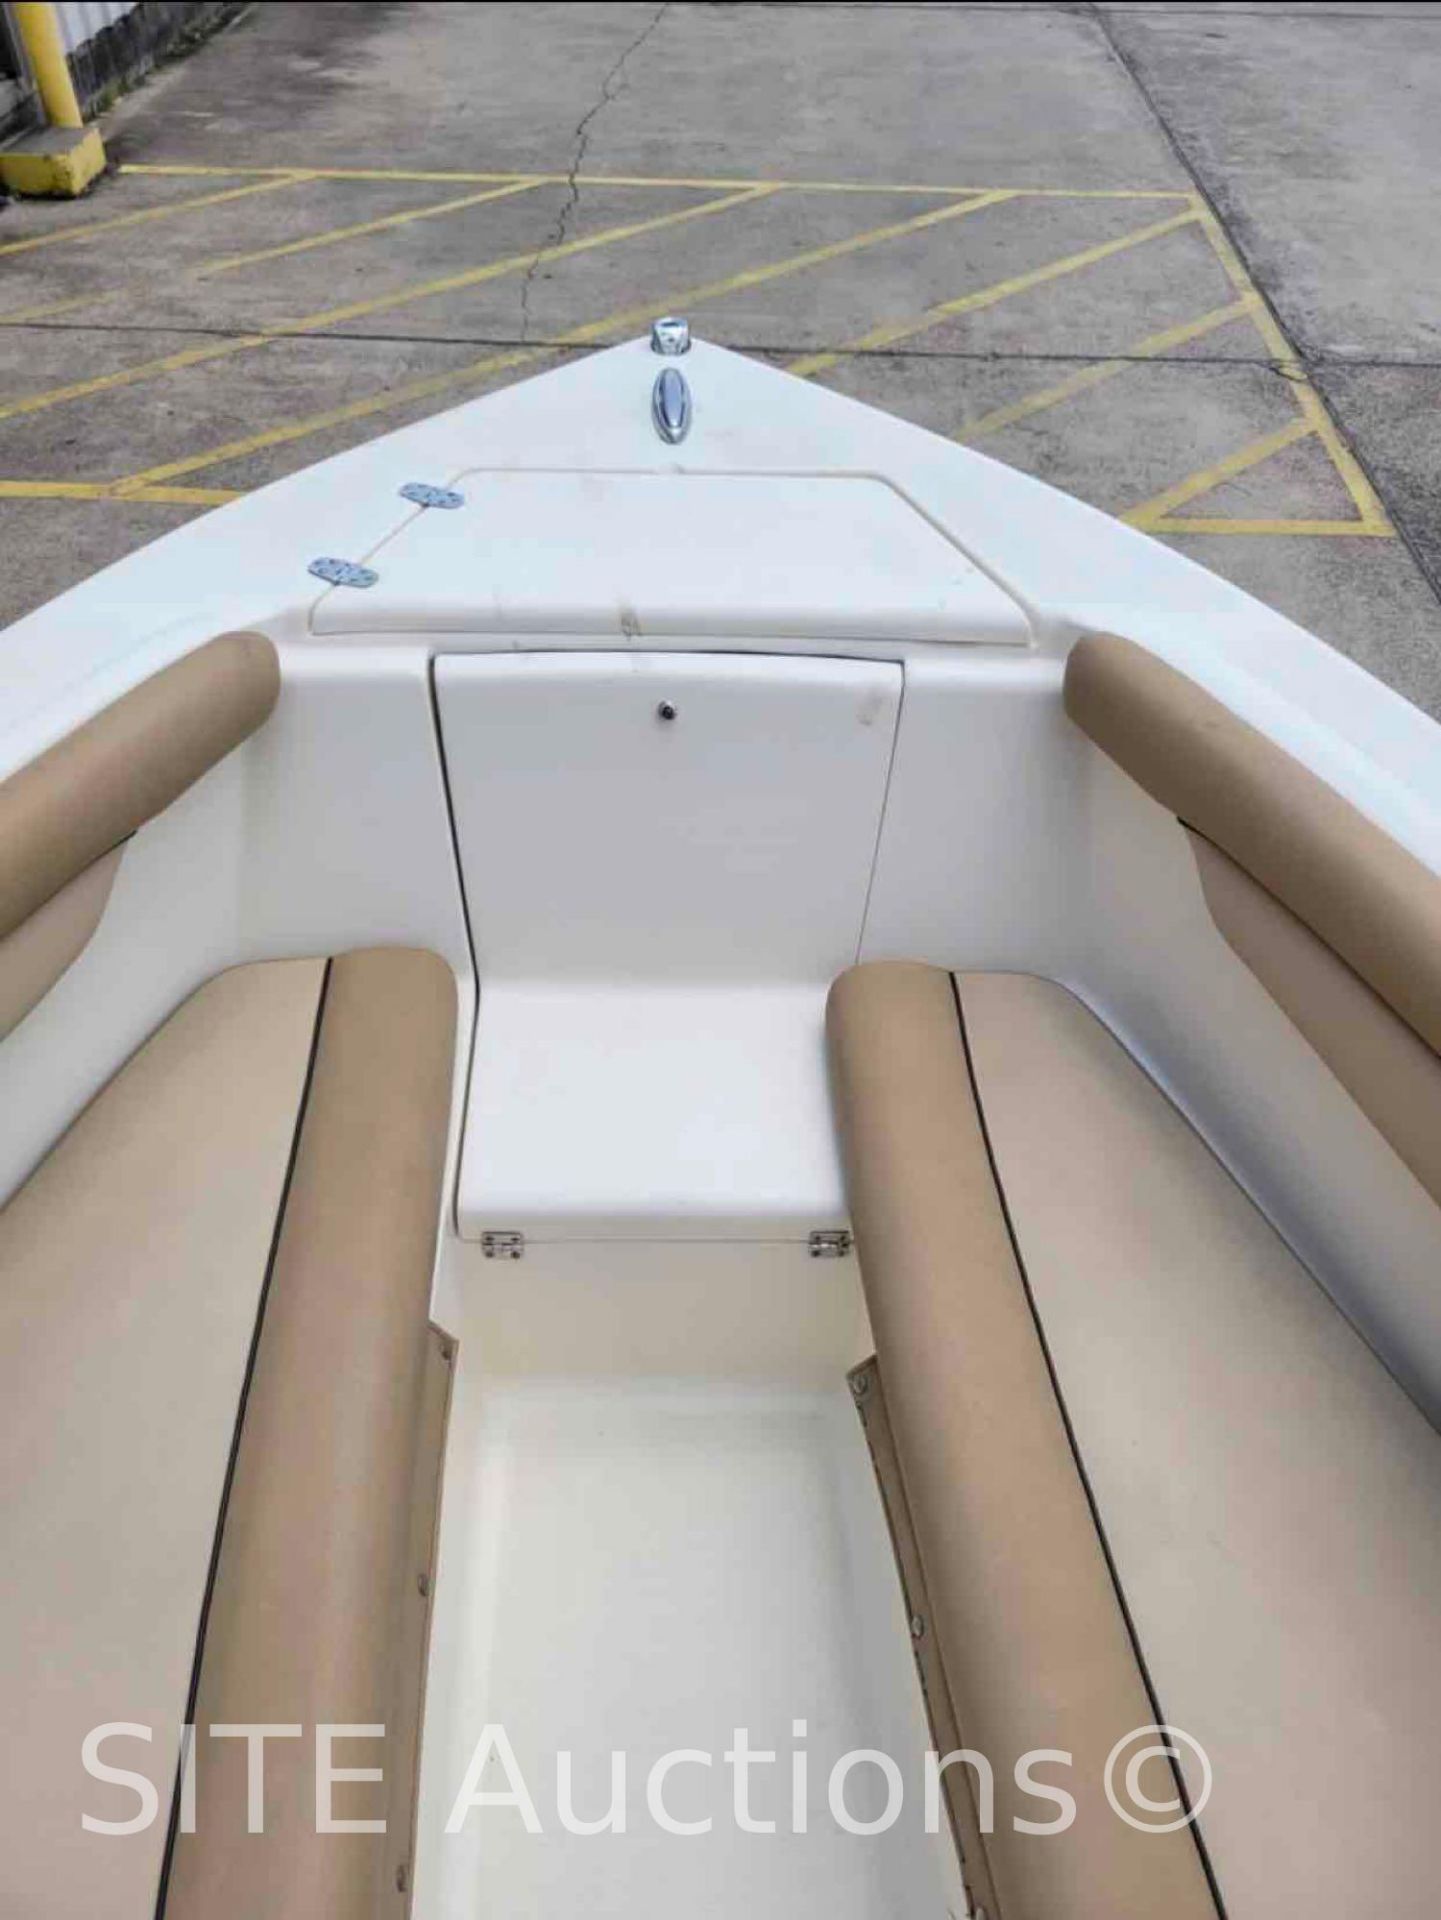 2020 Scout Dorado 20ft. Boat with Trailer - Image 12 of 21